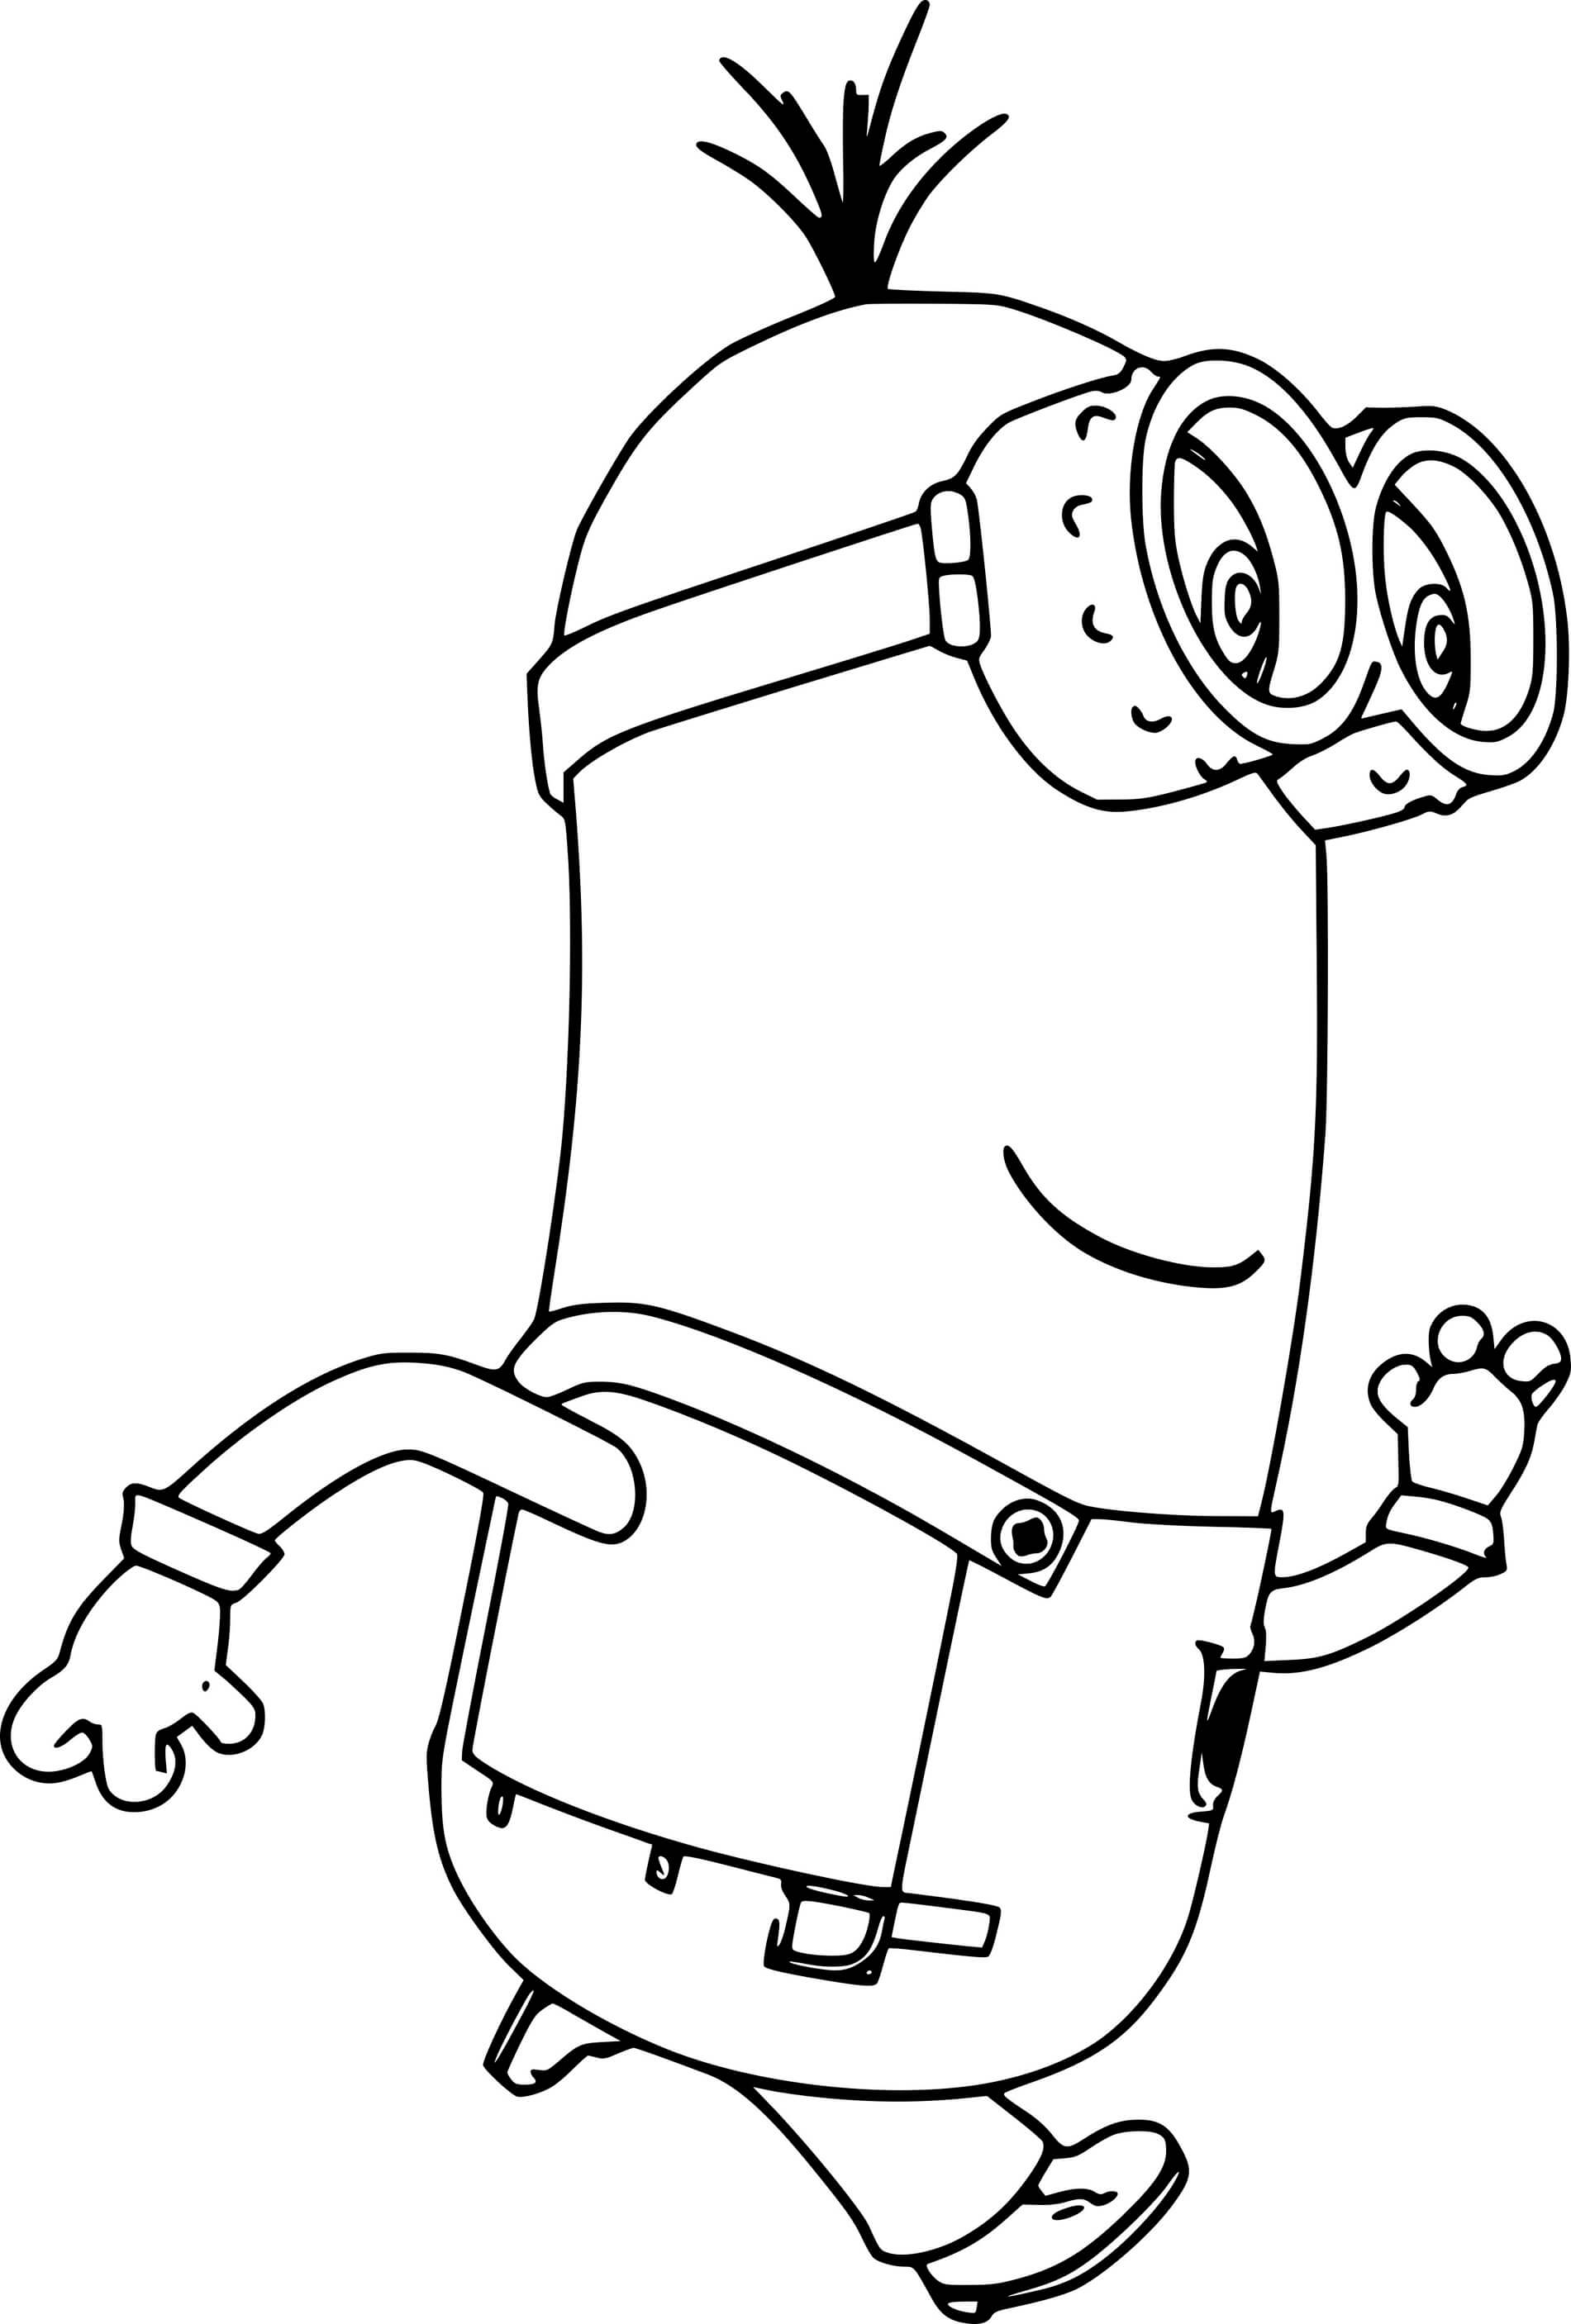 Tim Minion Running Coloring Page